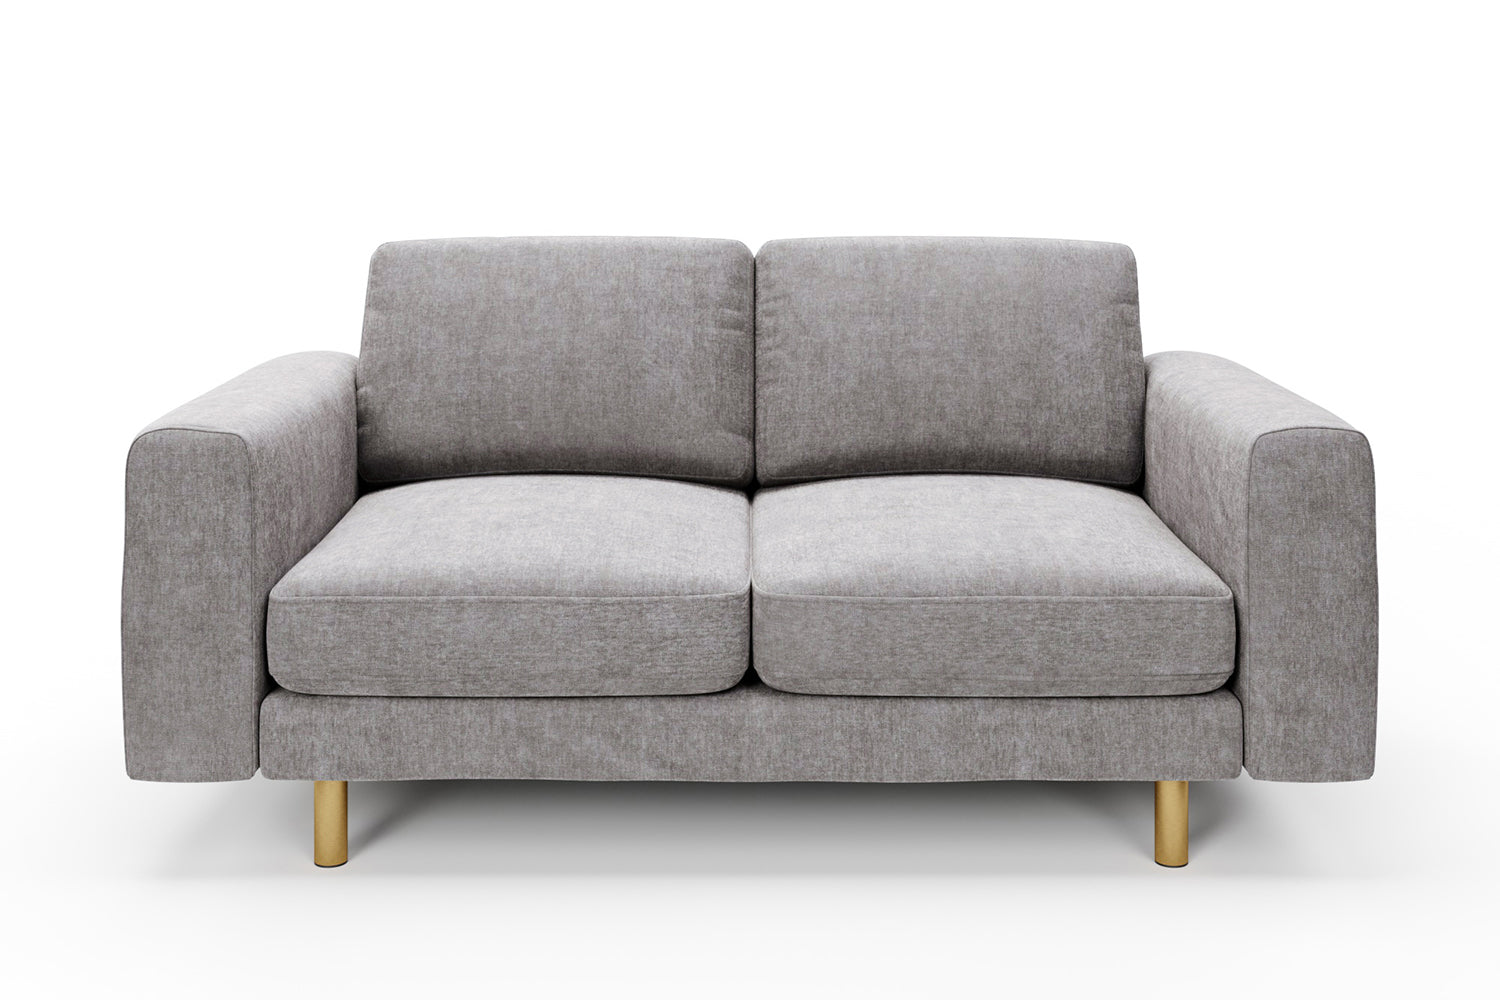 SNUG | The Big Chill 2 Seater Sofa in Mid Grey variant_40414877188144